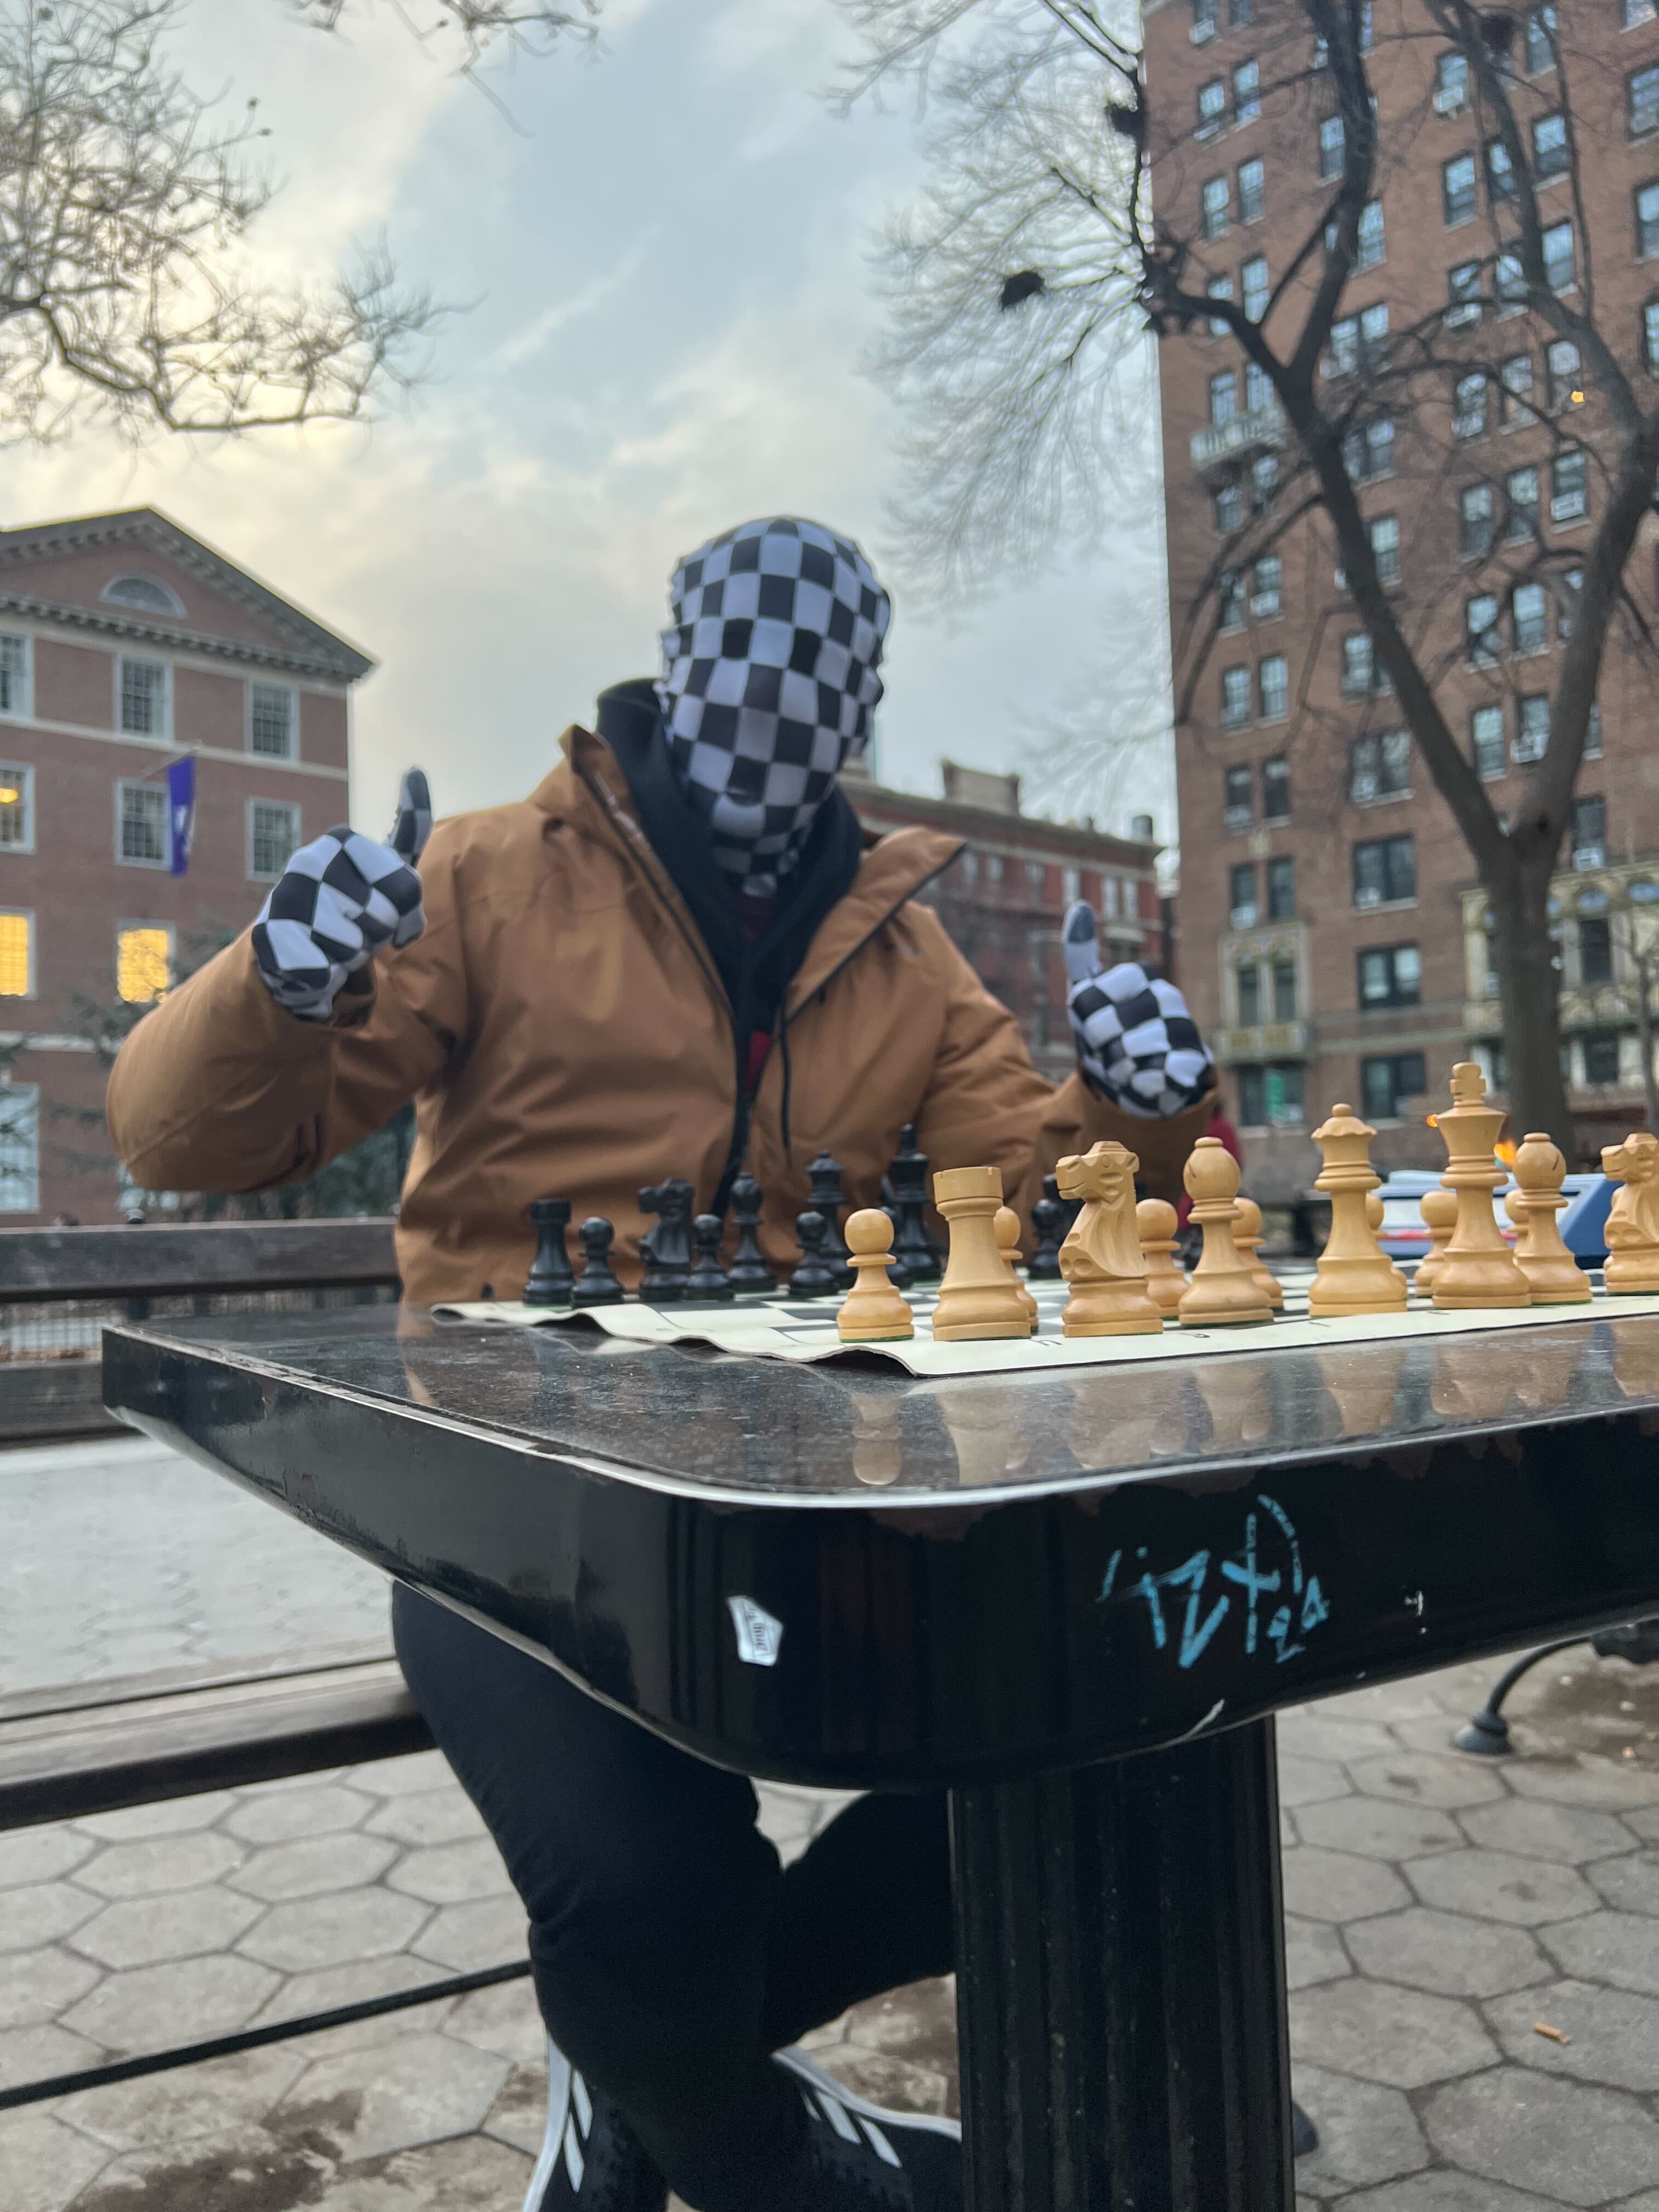 Play Chess Online for Free with Friends & Family - Chess.com : r/GothamChess